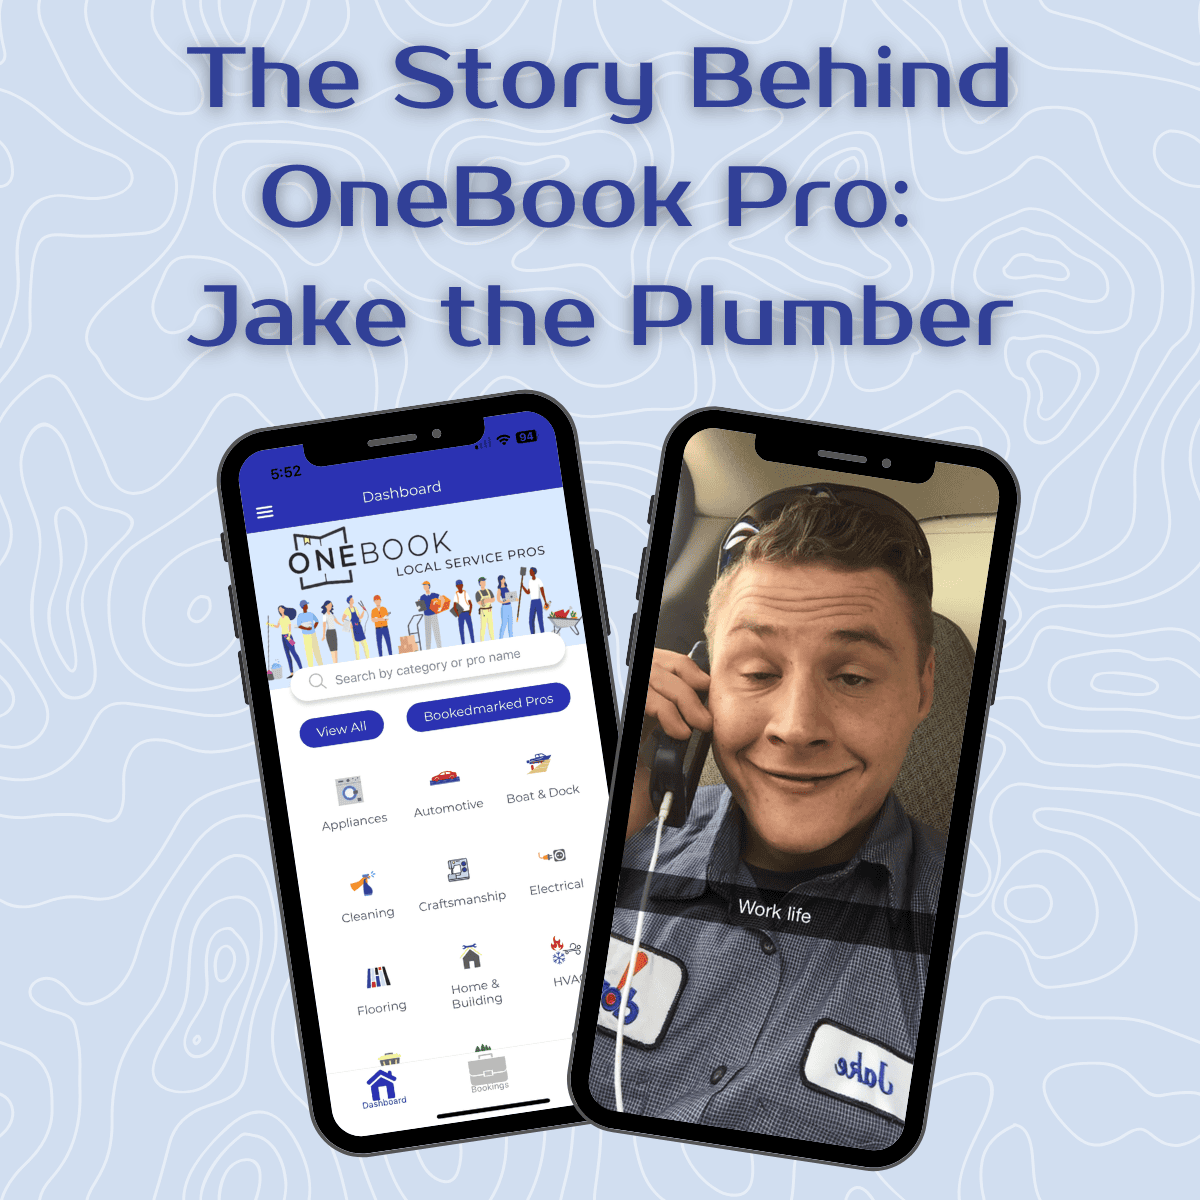 The Story Behind OneBook Pro: Inspired by Jake the Plumber